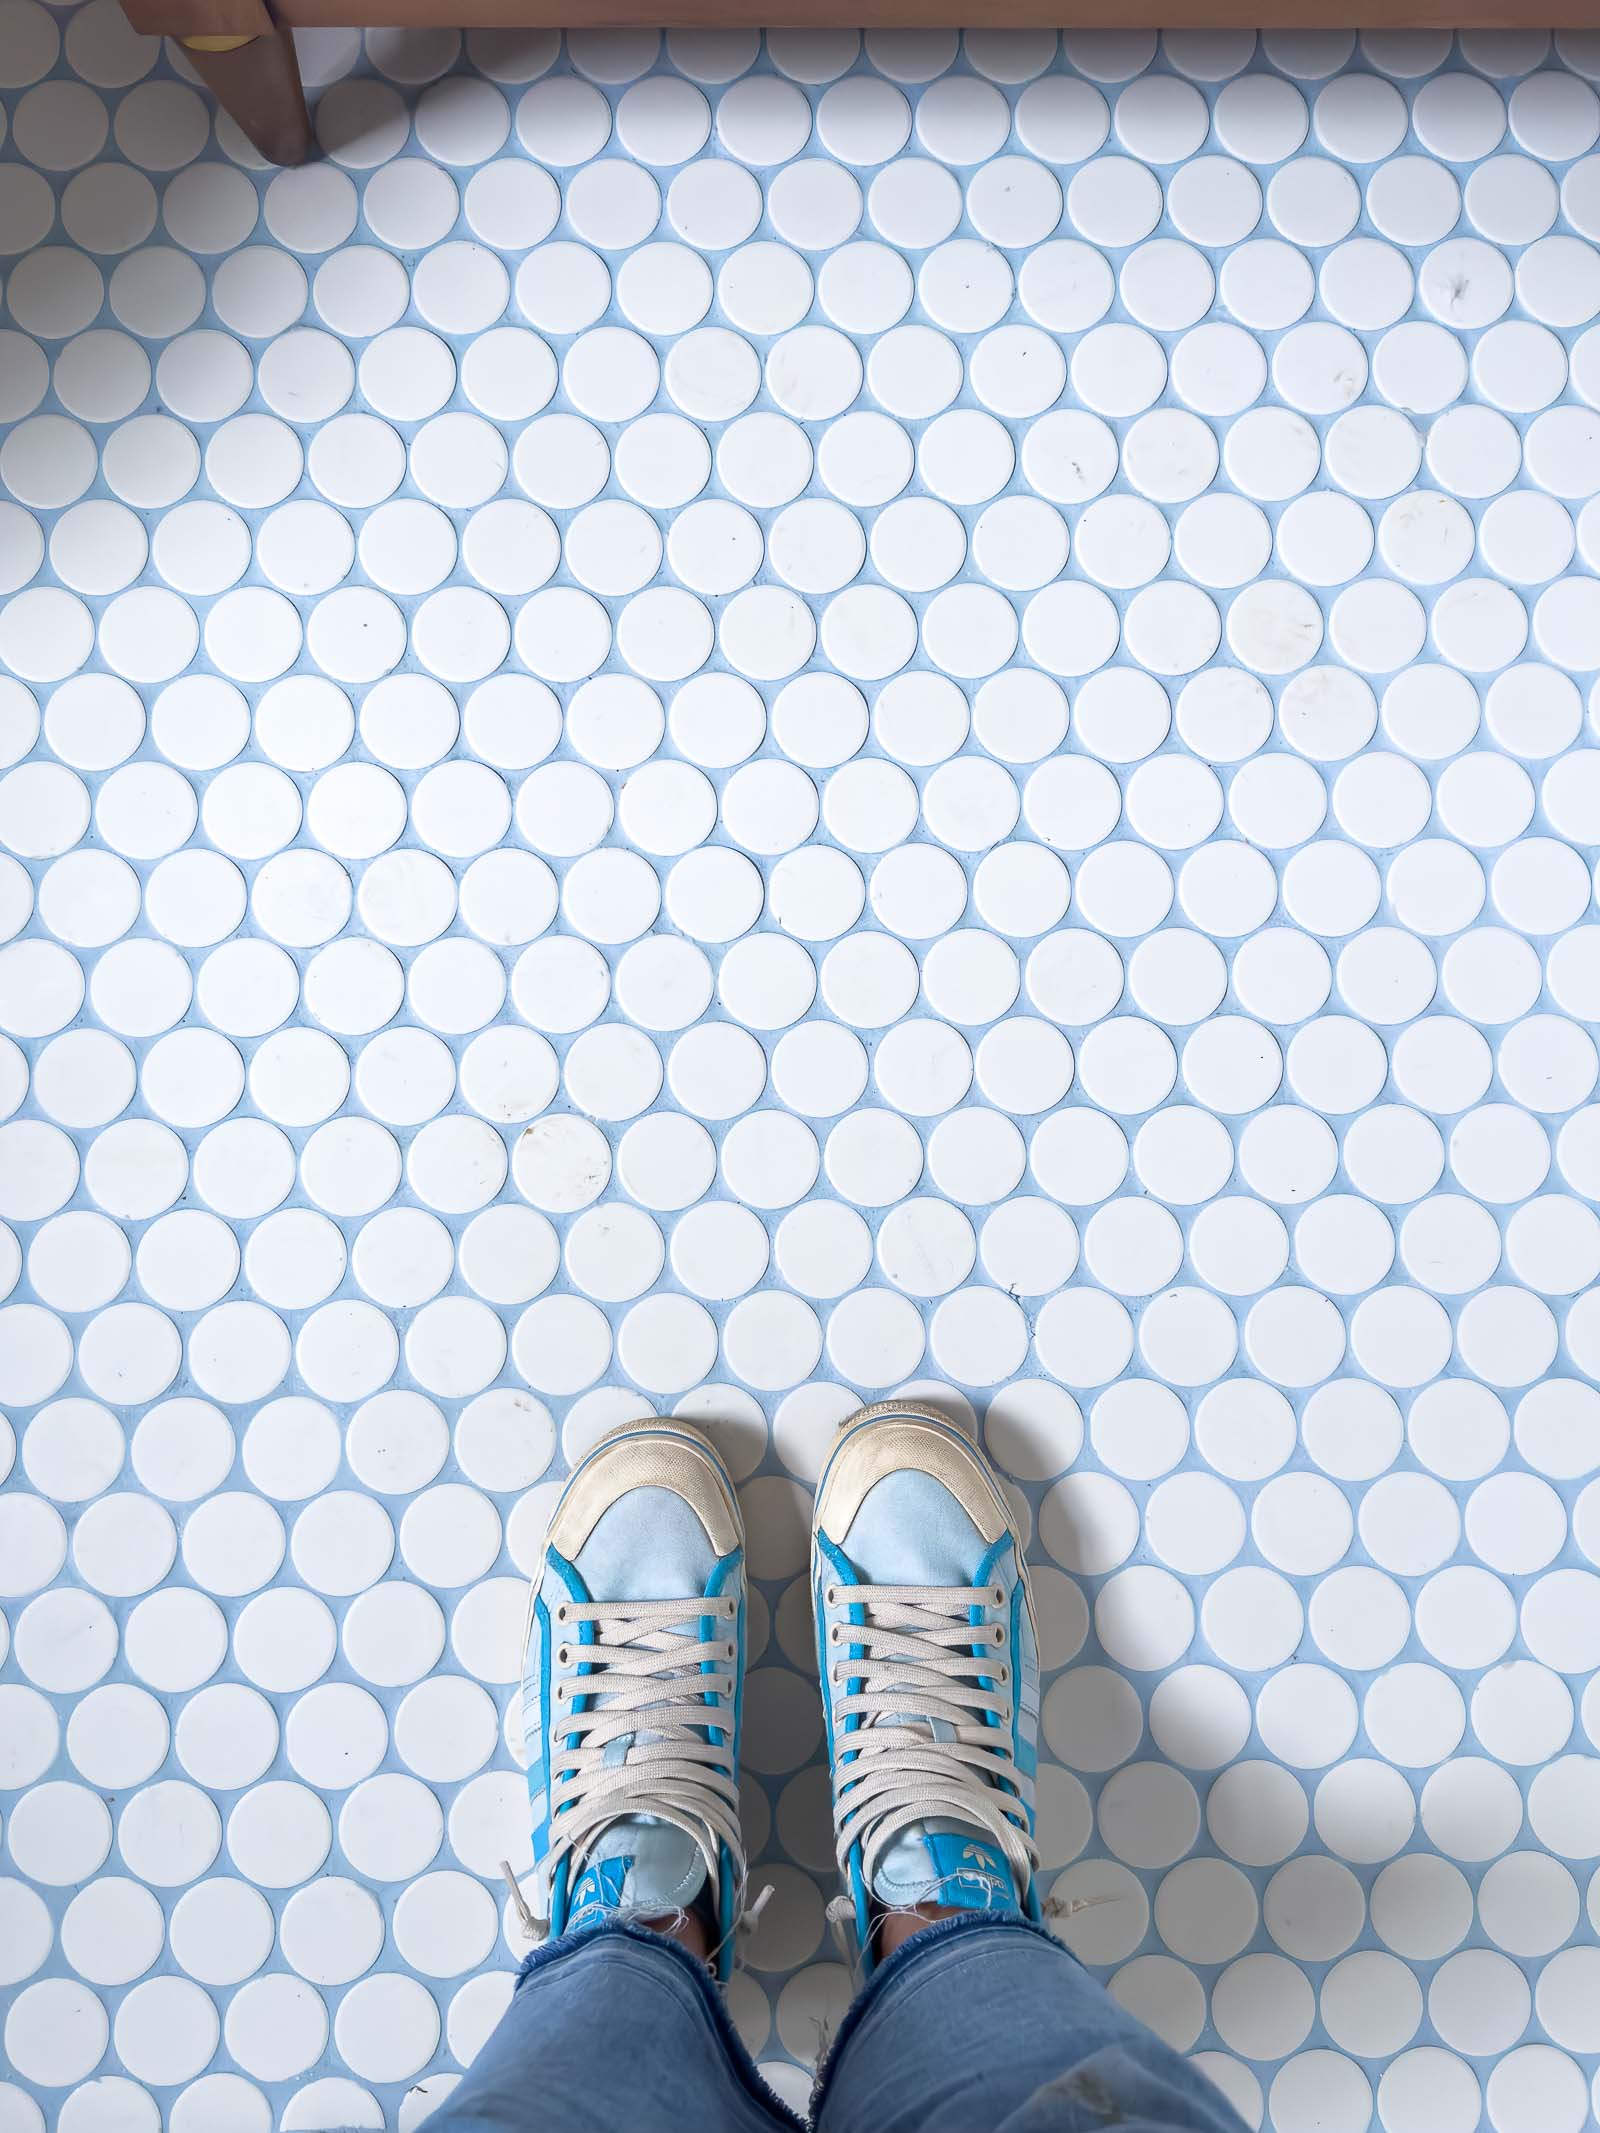 blue grout on white tiles